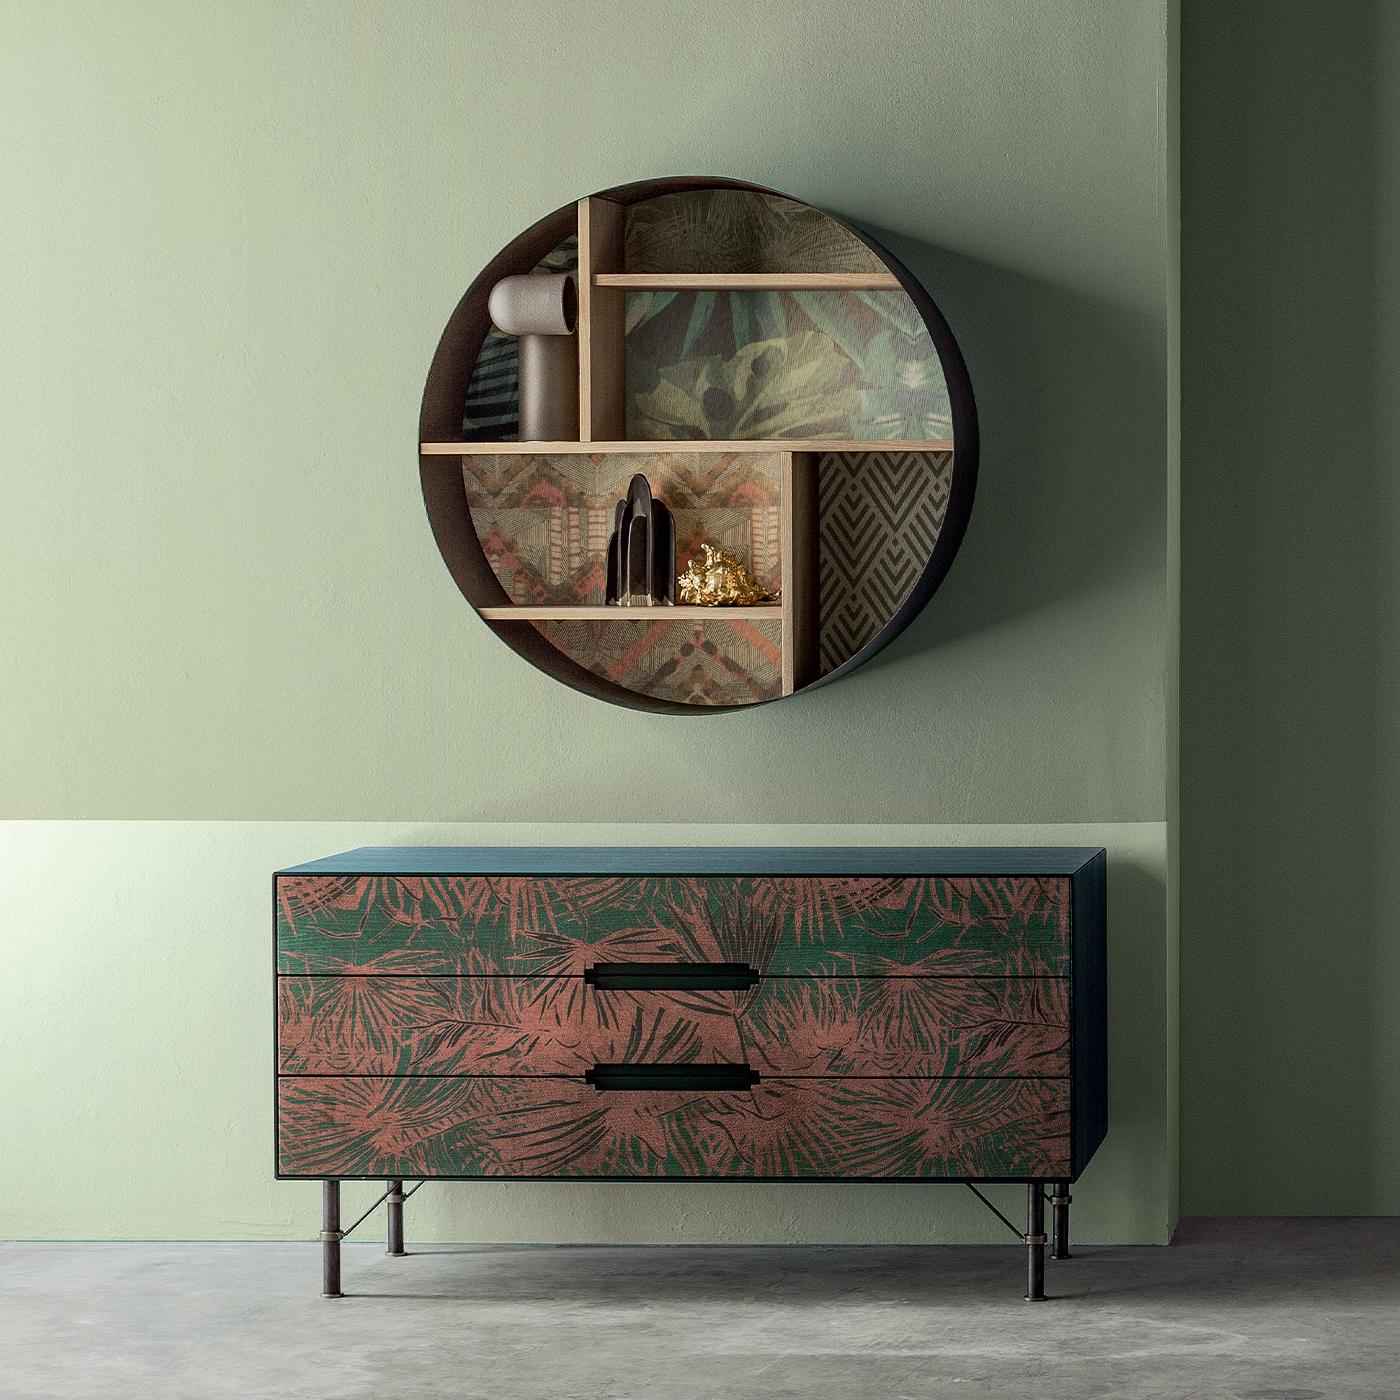 The style pink leaf sideboard makes a refreshing addition to the hallway or living room, boasting a vibrant pink and green tropical print. Its three drawers are equipped with cutout handles for a sleek, streamlined aesthetic. Crafted from solid